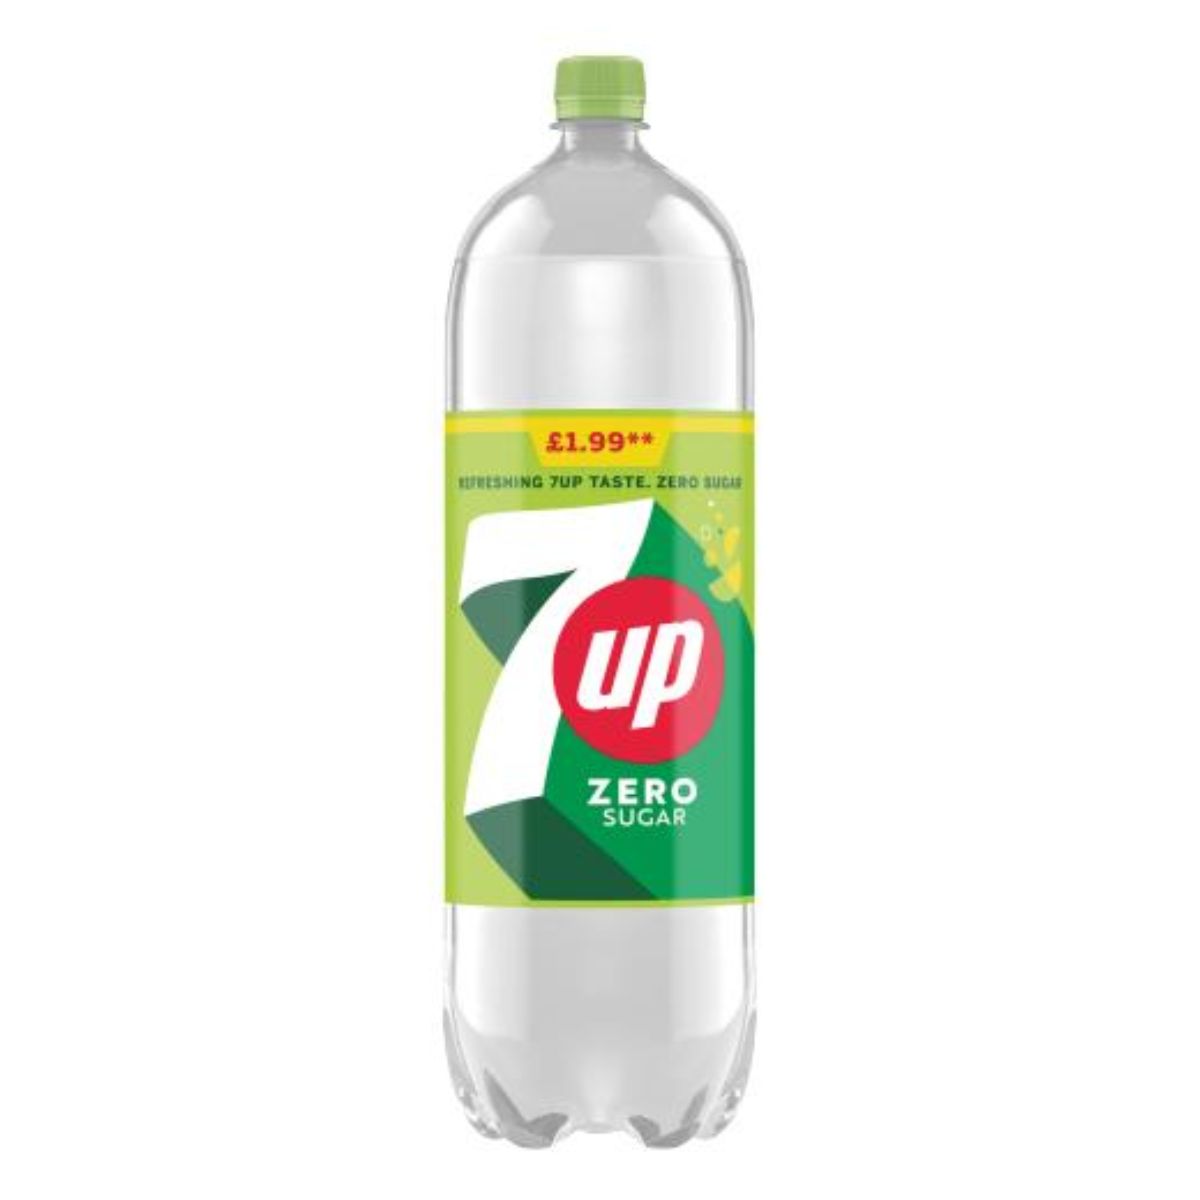 A bottle of 7up - Zero Sugar - 2L water on a white background.